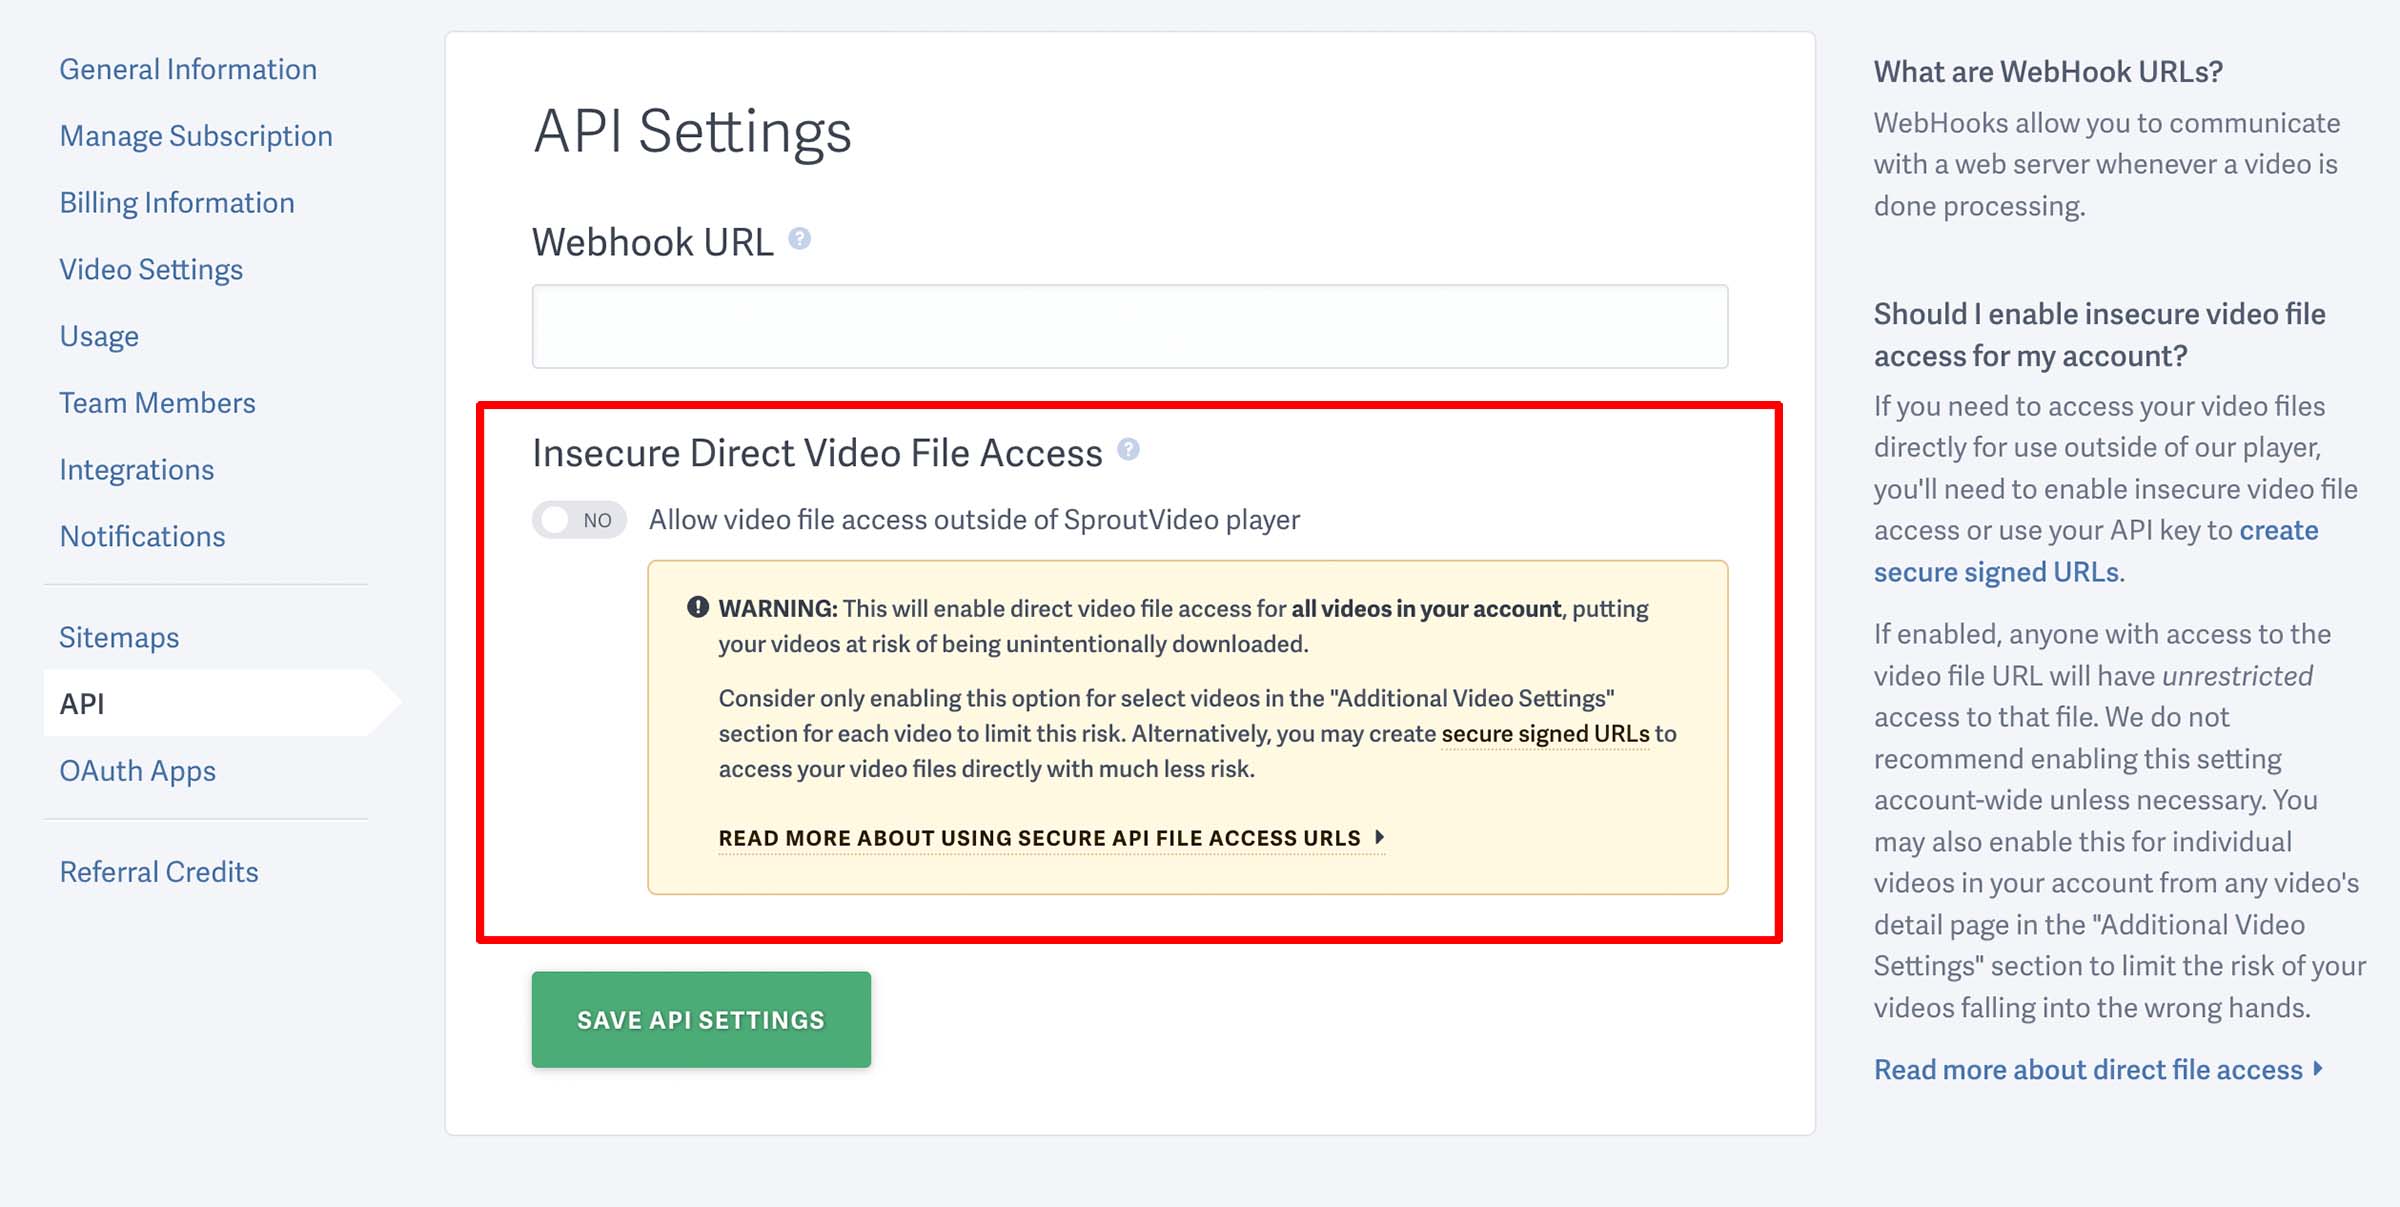 Enable 'Insecure Direct File Access' for all videos in your account